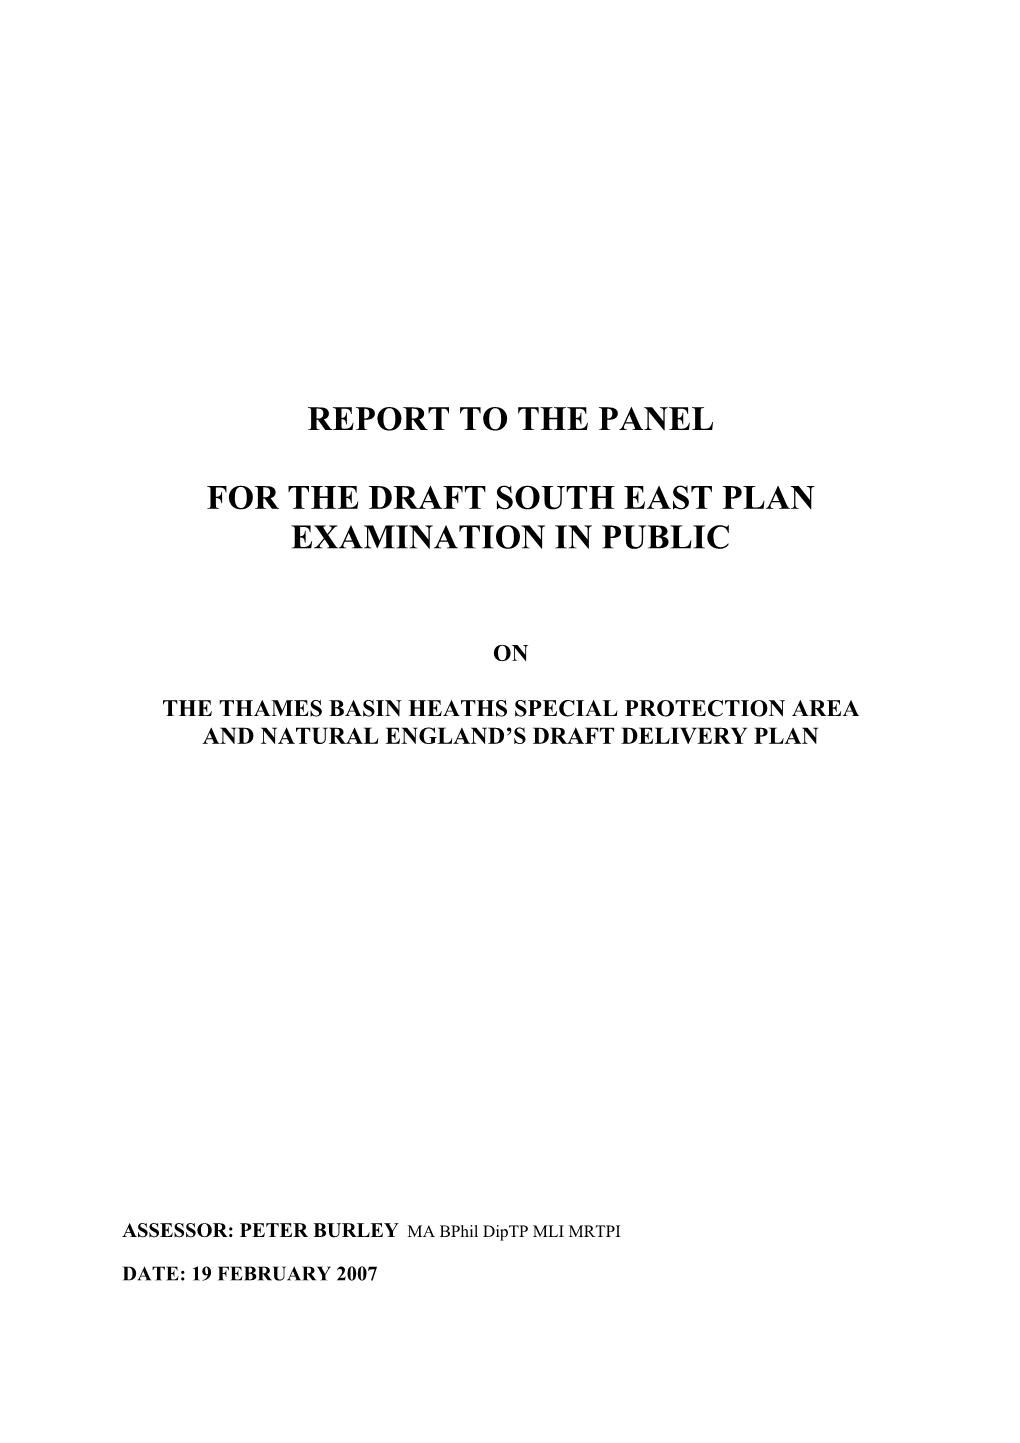 Report to the Panel for the Draft South East Plan Examination in Public on My Findings